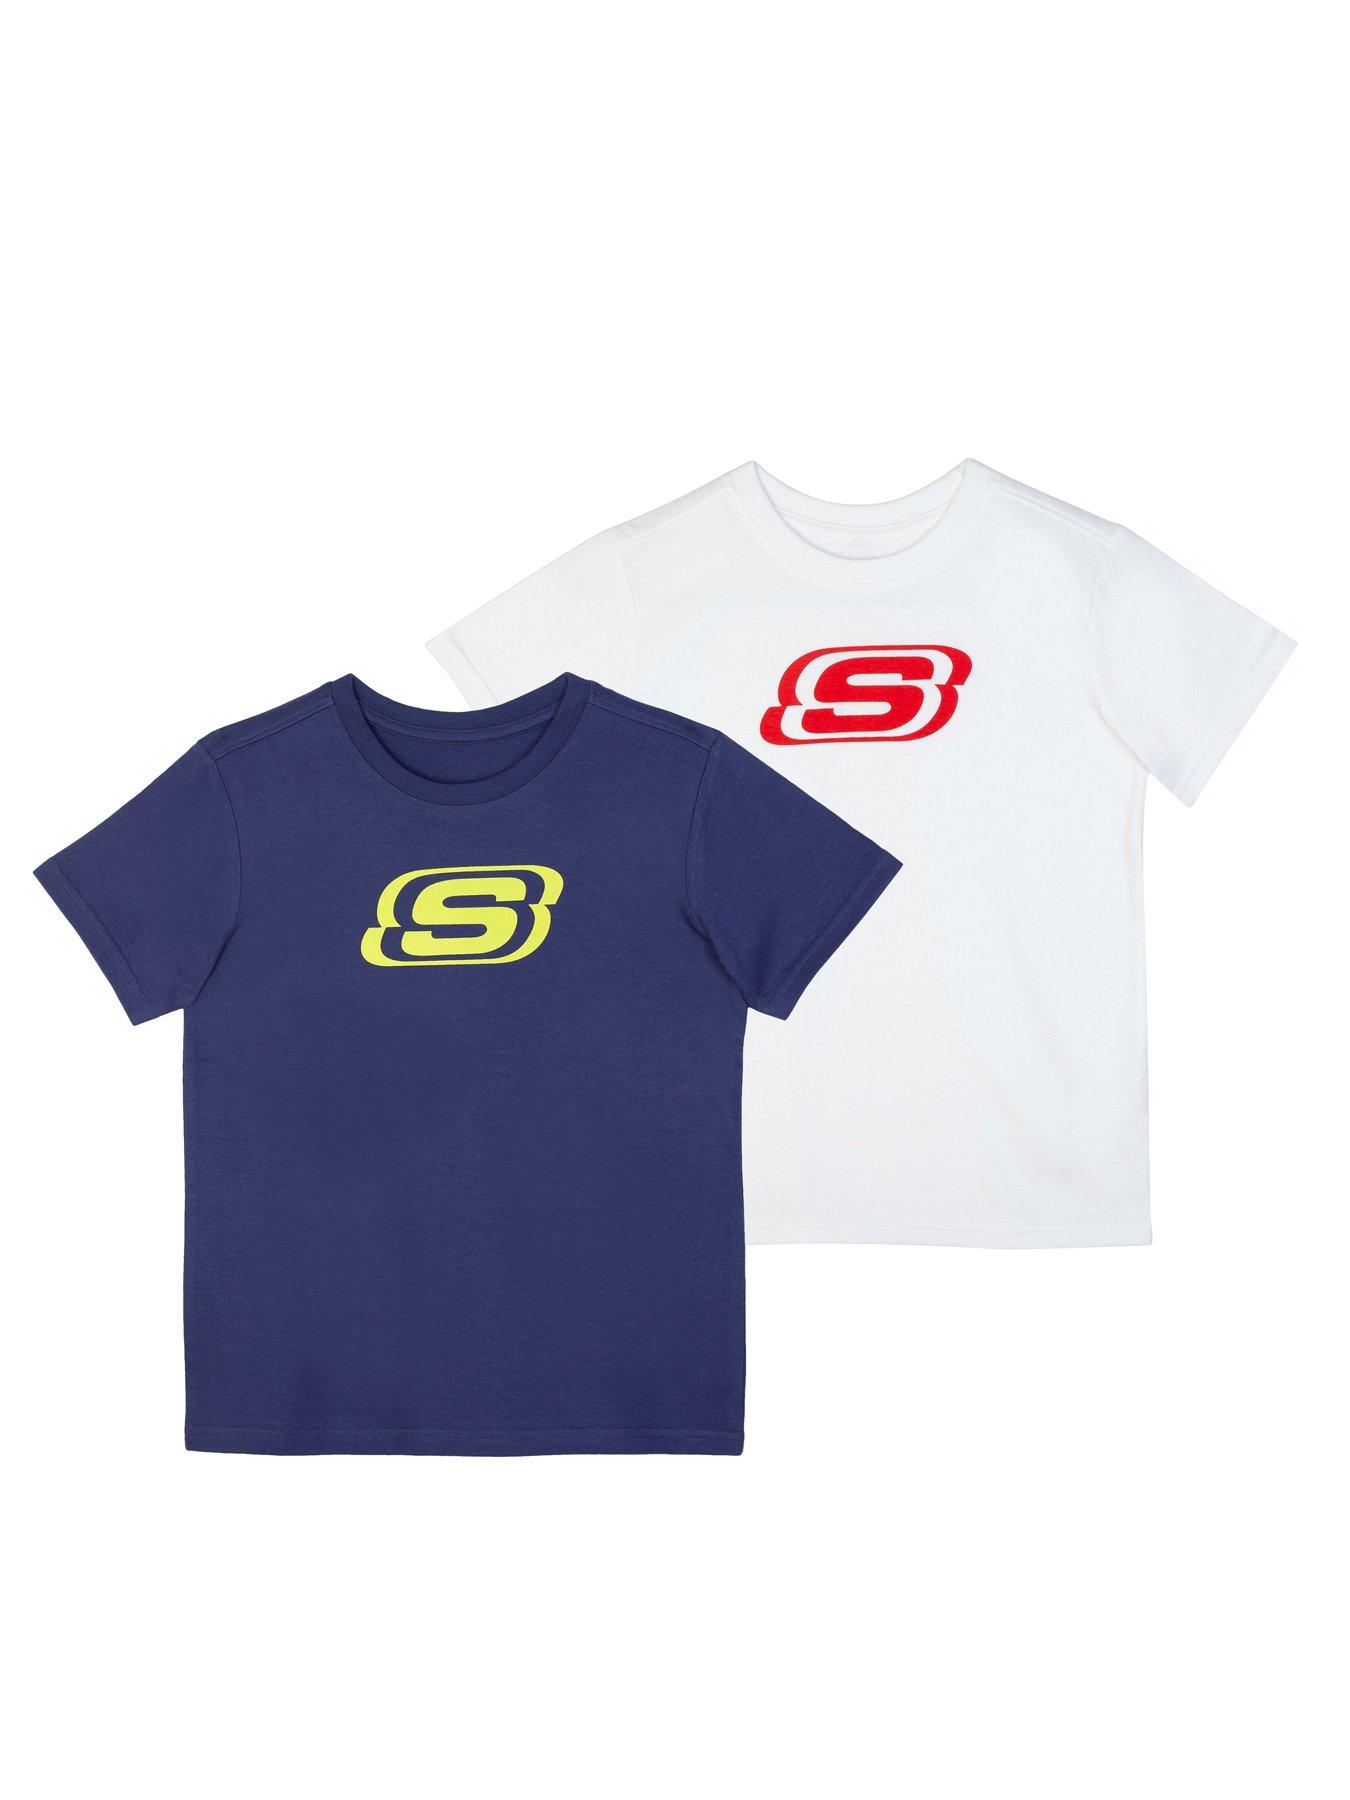 NEW Boys Branded Kickers Lightweight Printed Logo T Shirt Top Size Age 7-13 